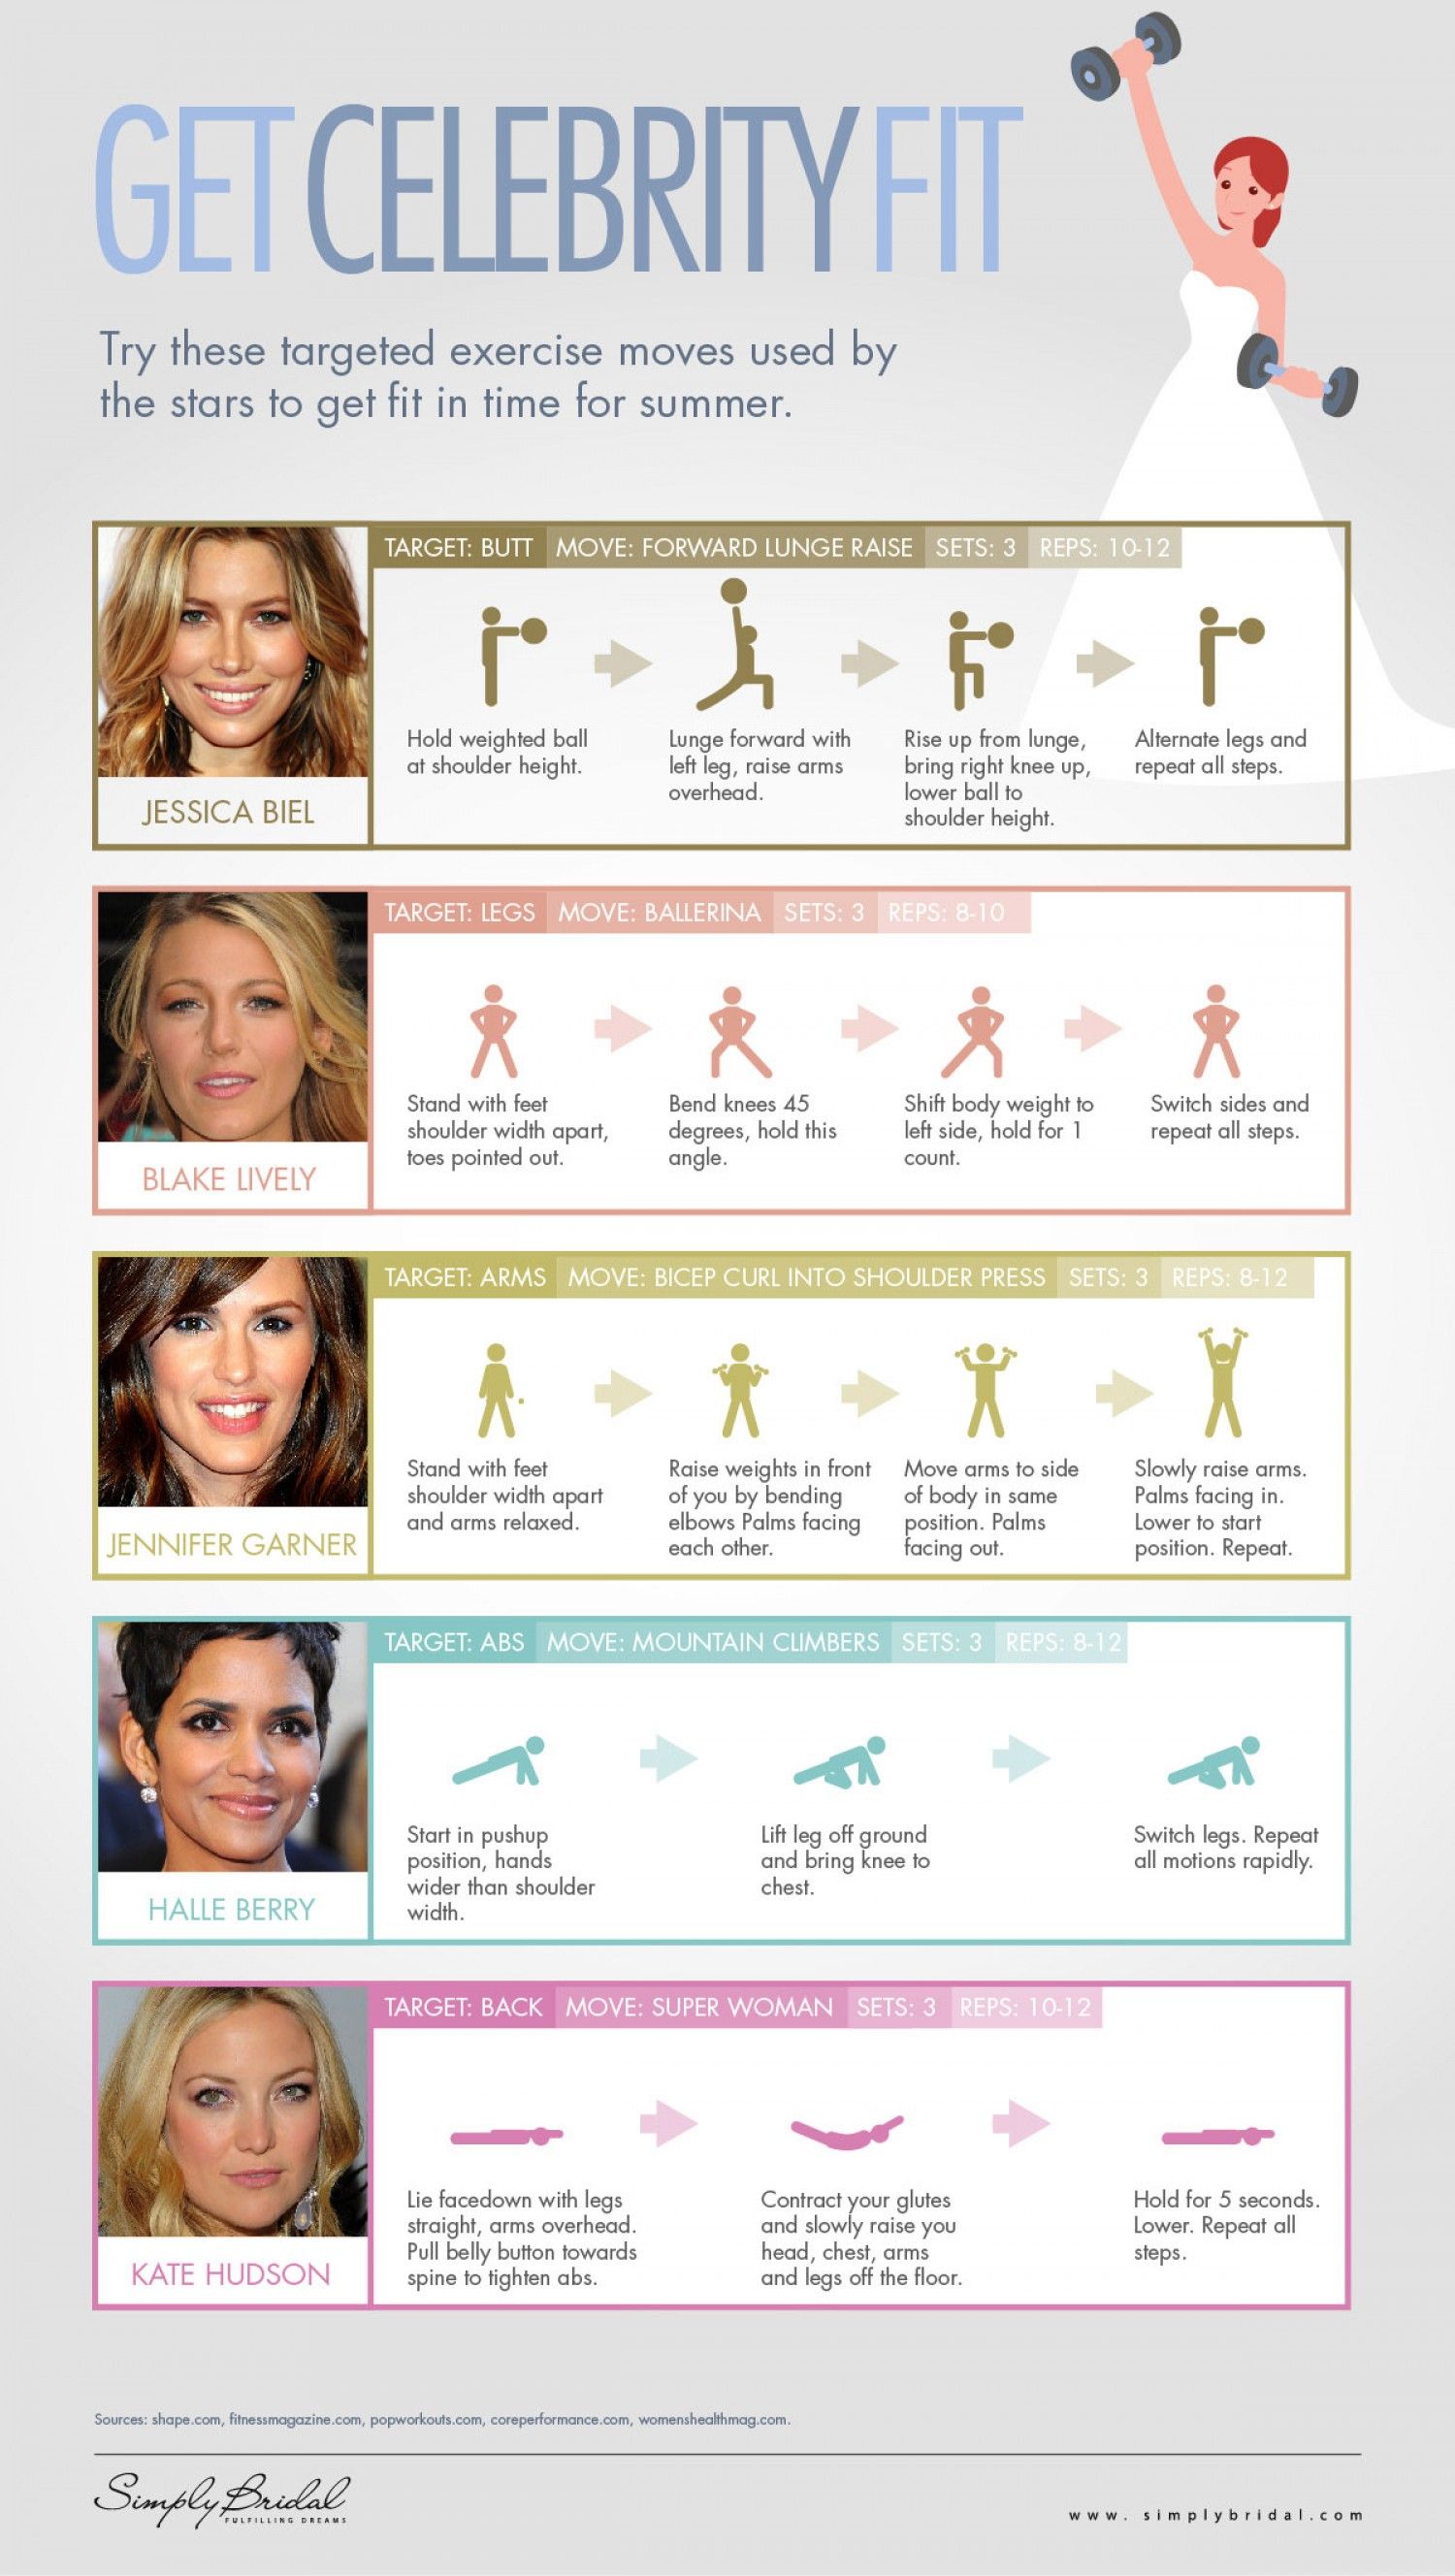 Get Fit: Celebrity Style